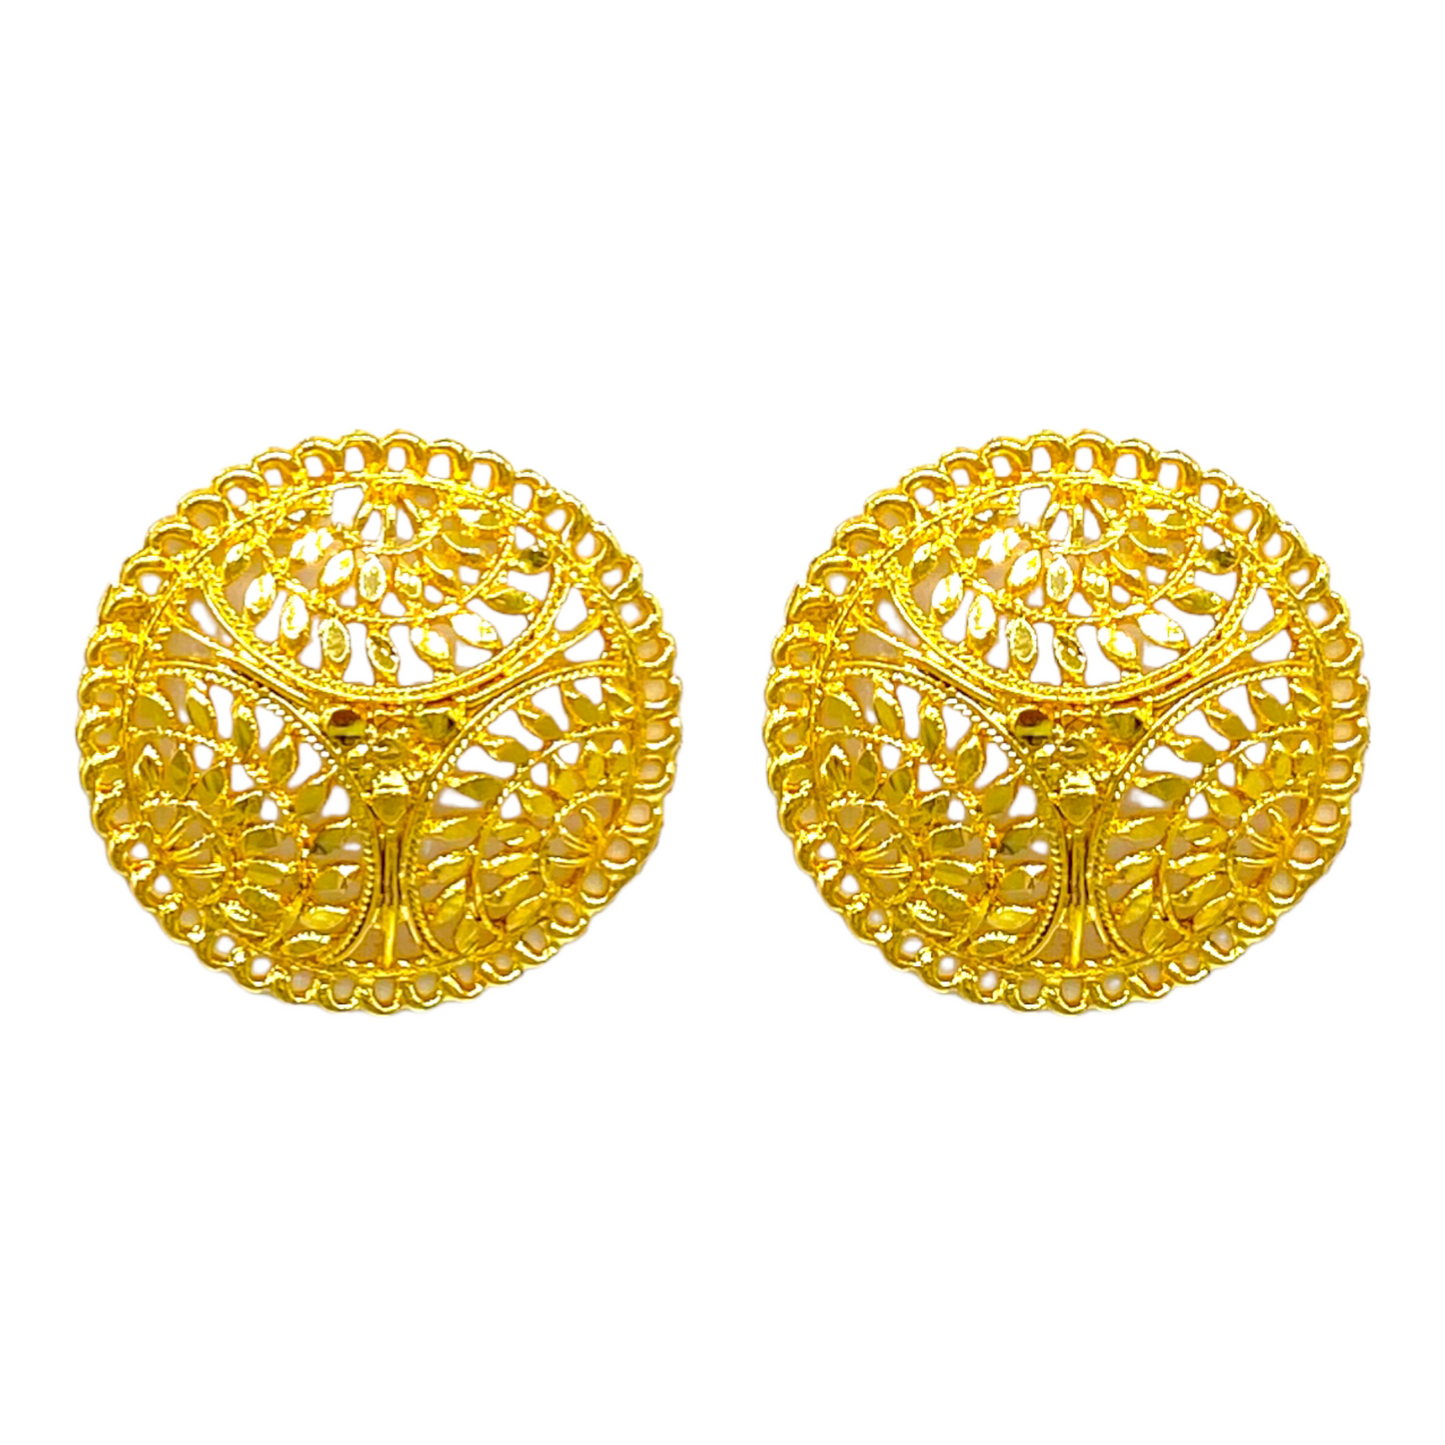 Gold floral Studded Earrings